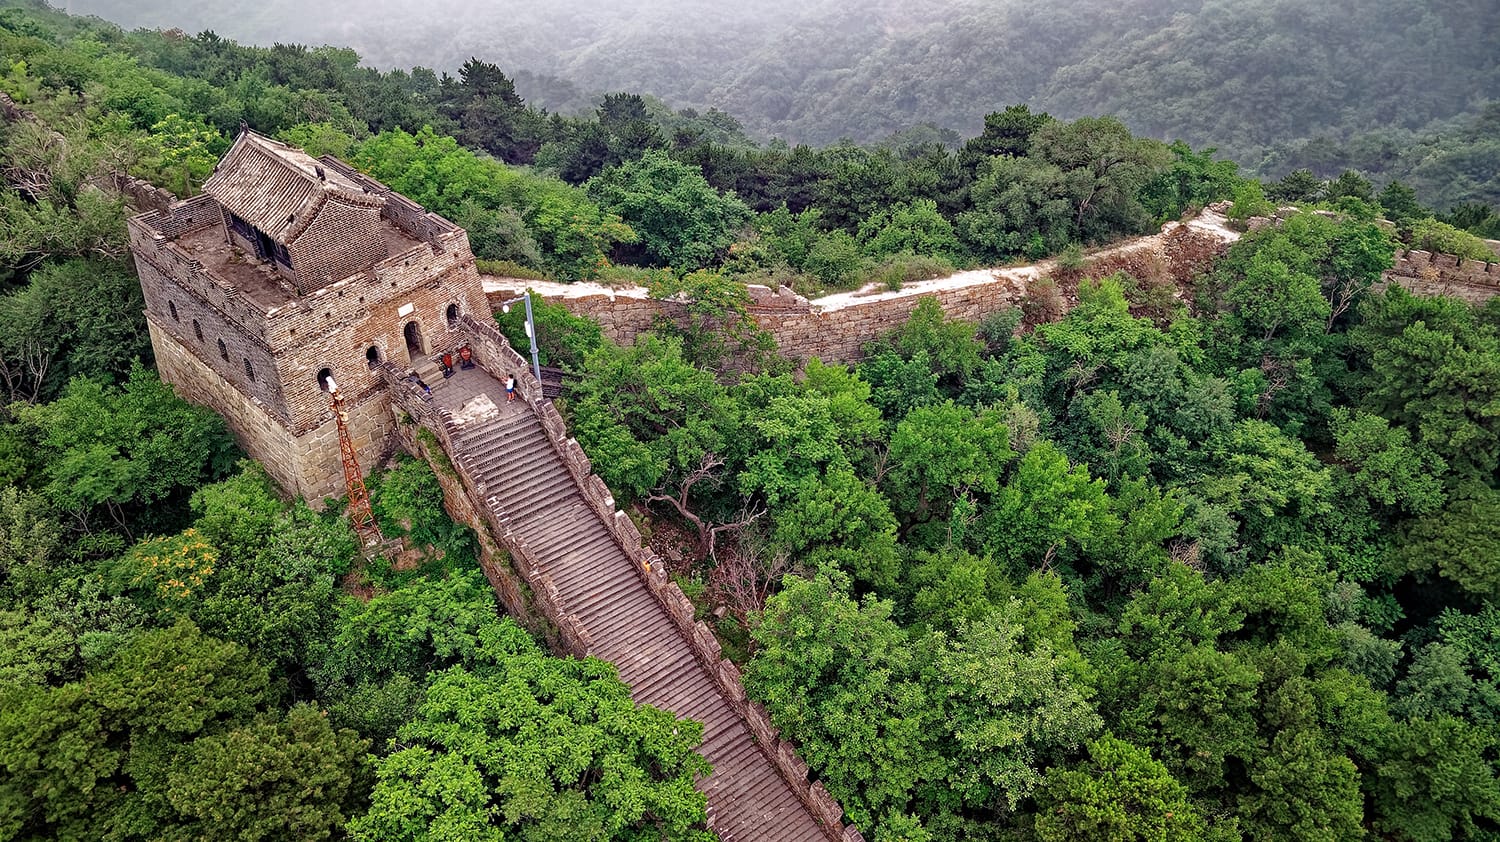 An Aerial Shot of Ancient Architecture